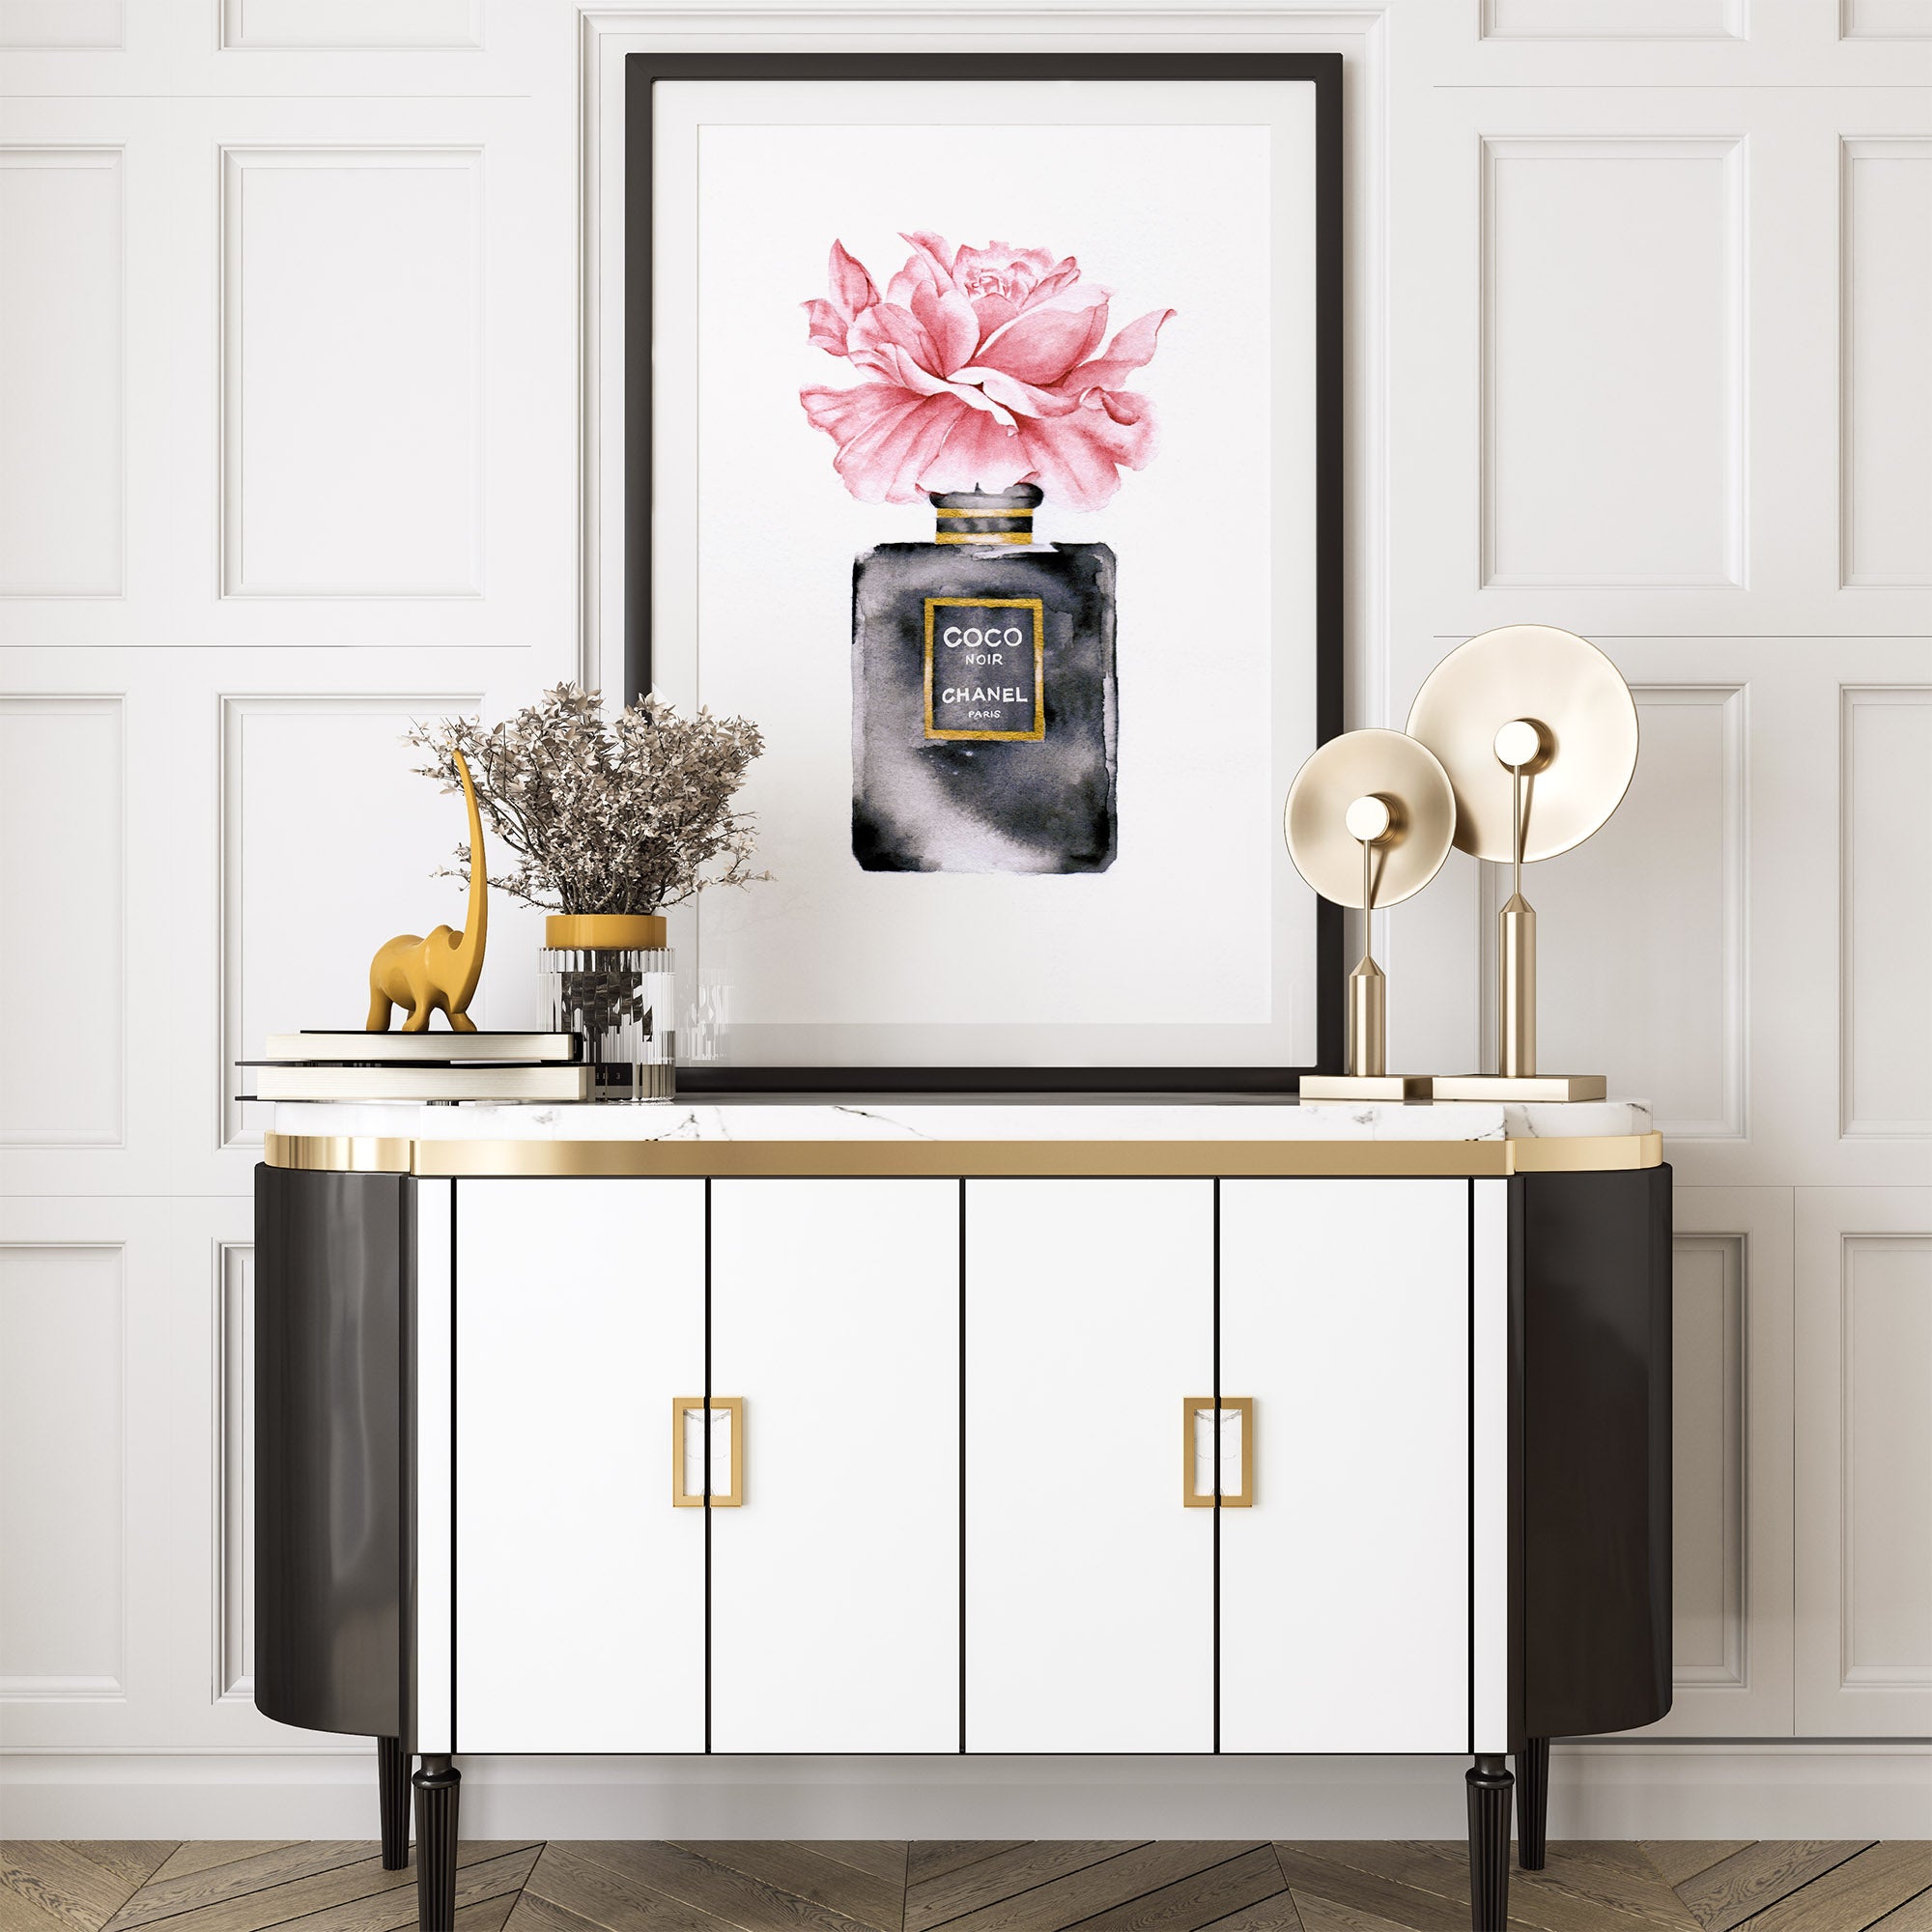 Scent of Roses Print  Watercolor Chanel Perfume Bottle Wall Art in Pink,  Black & Gold – TemproDesign